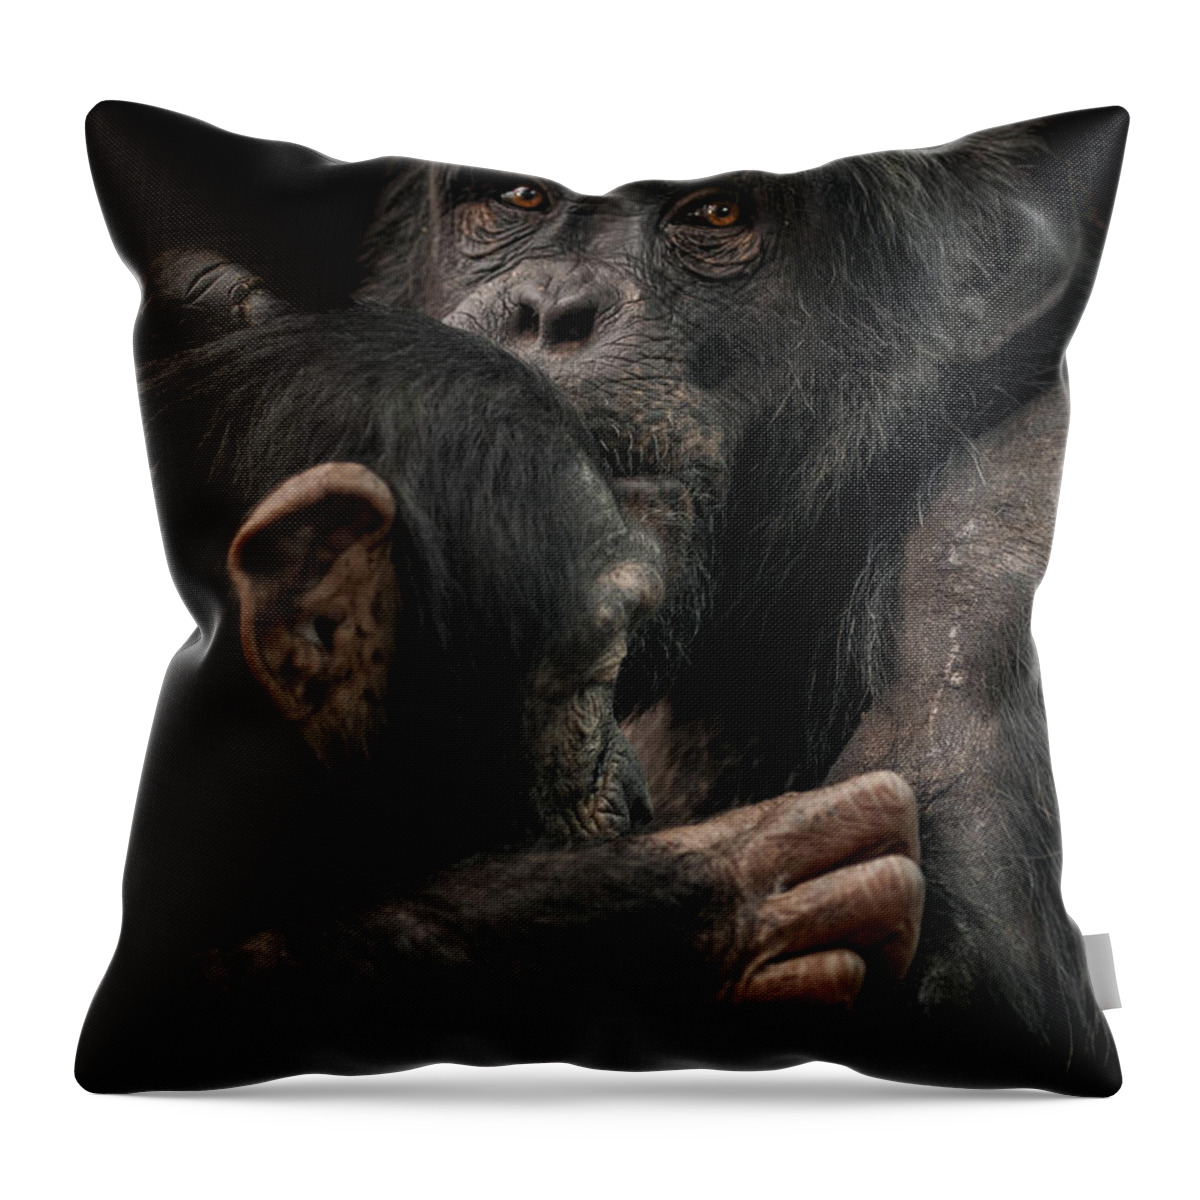 Tenderness Throw Pillow featuring the photograph Tenderness by Paul Neville